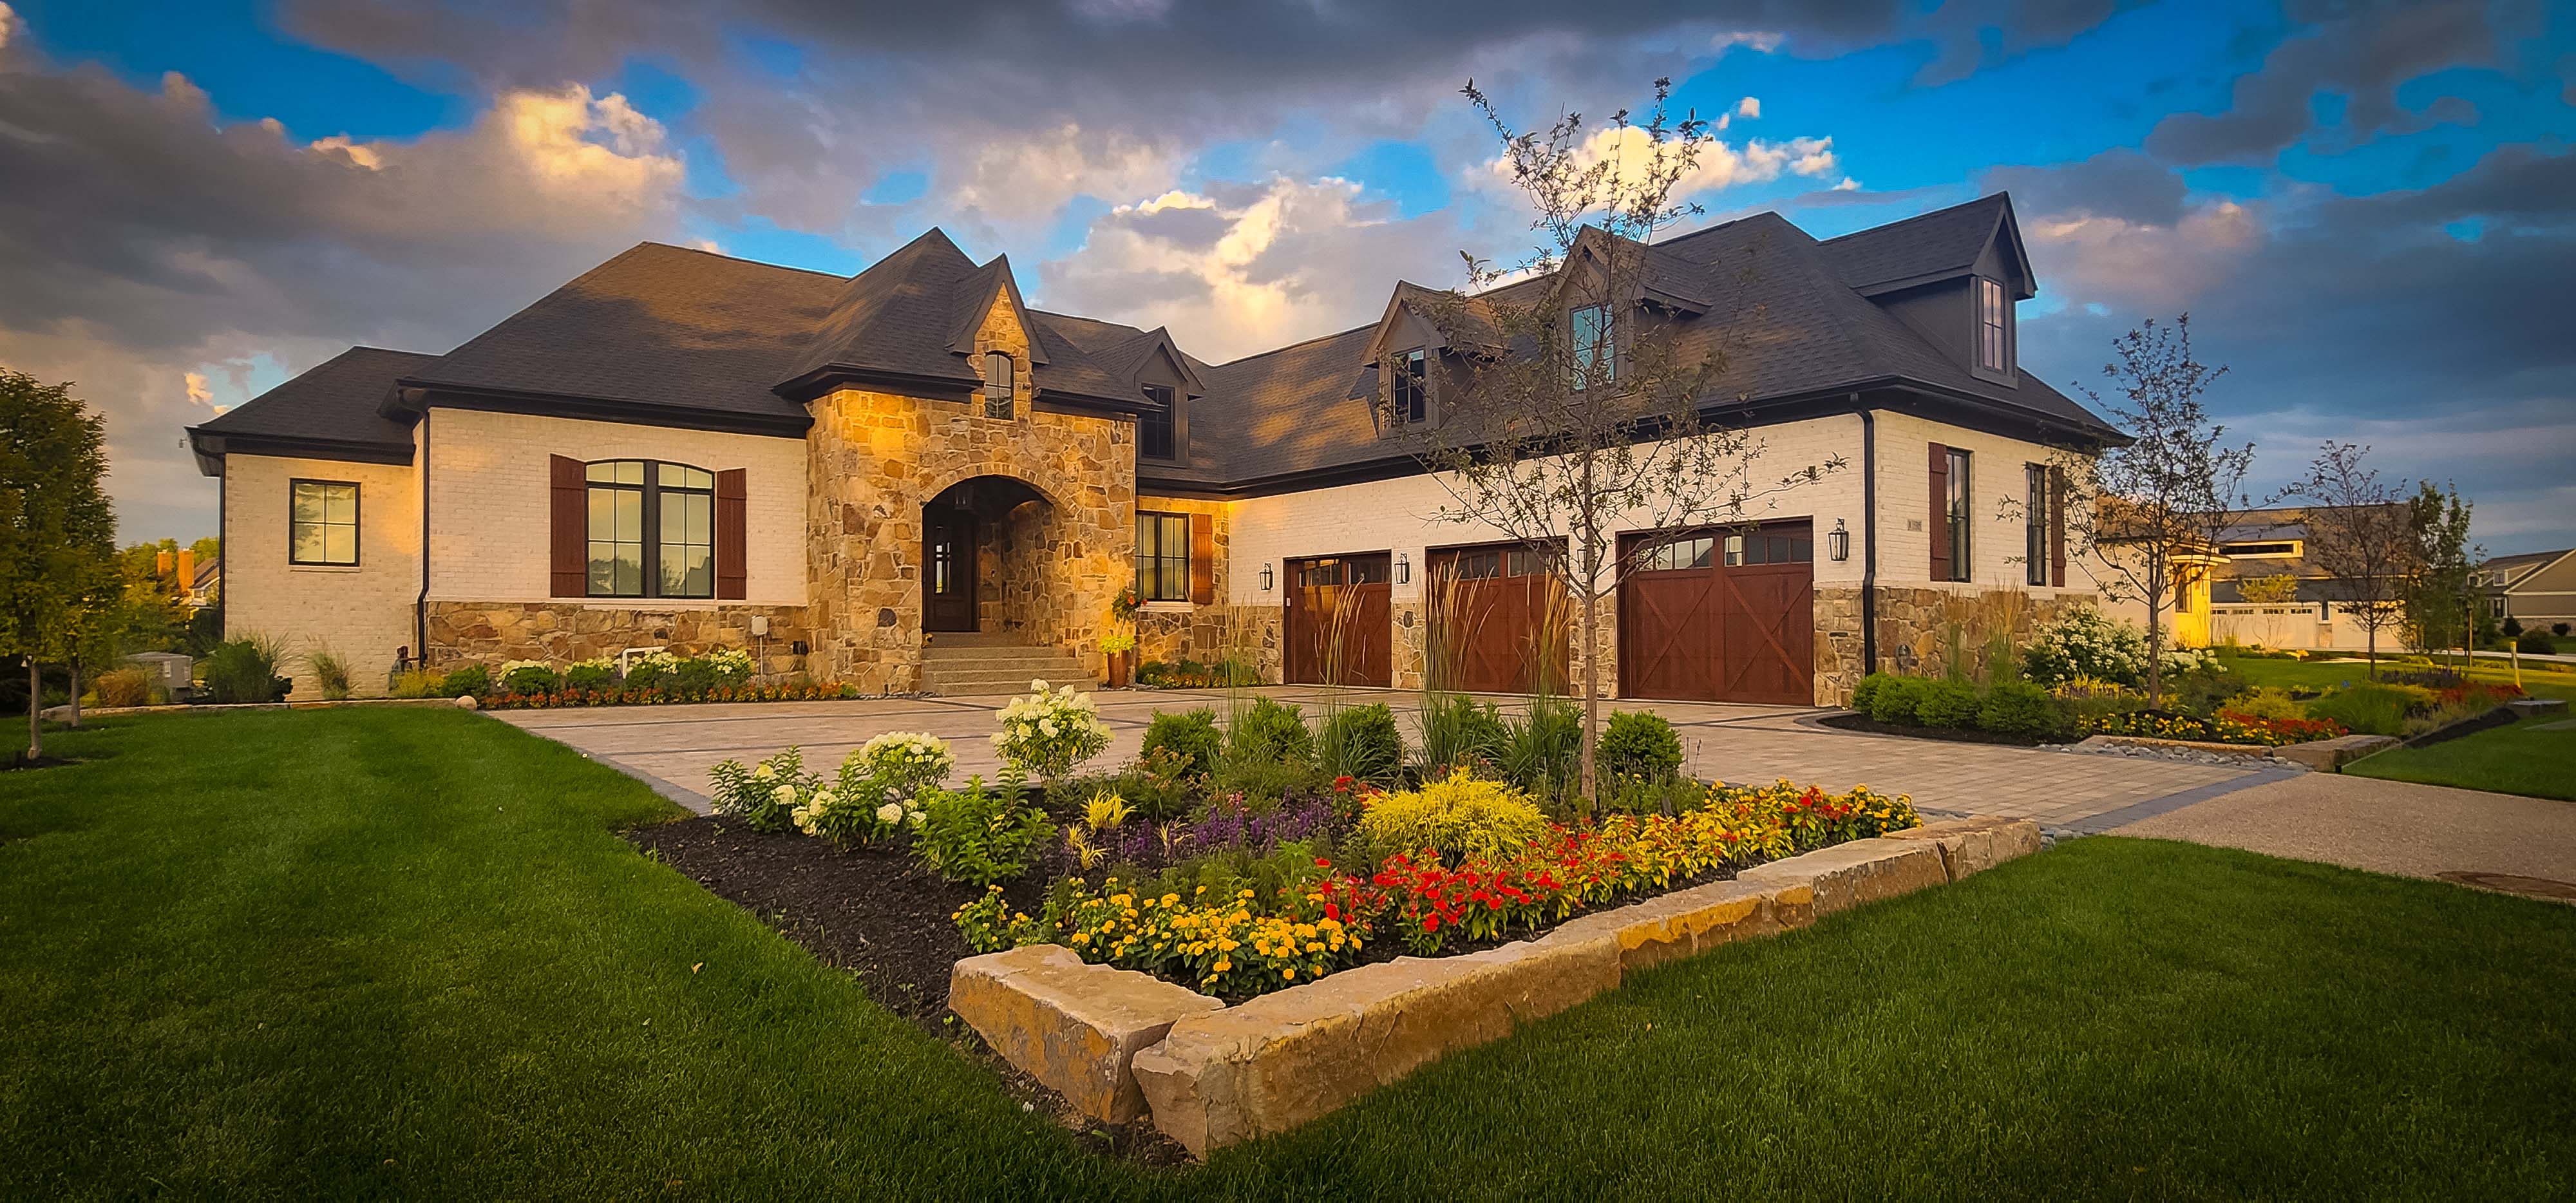 Natural stone home with colorful landscape plantings